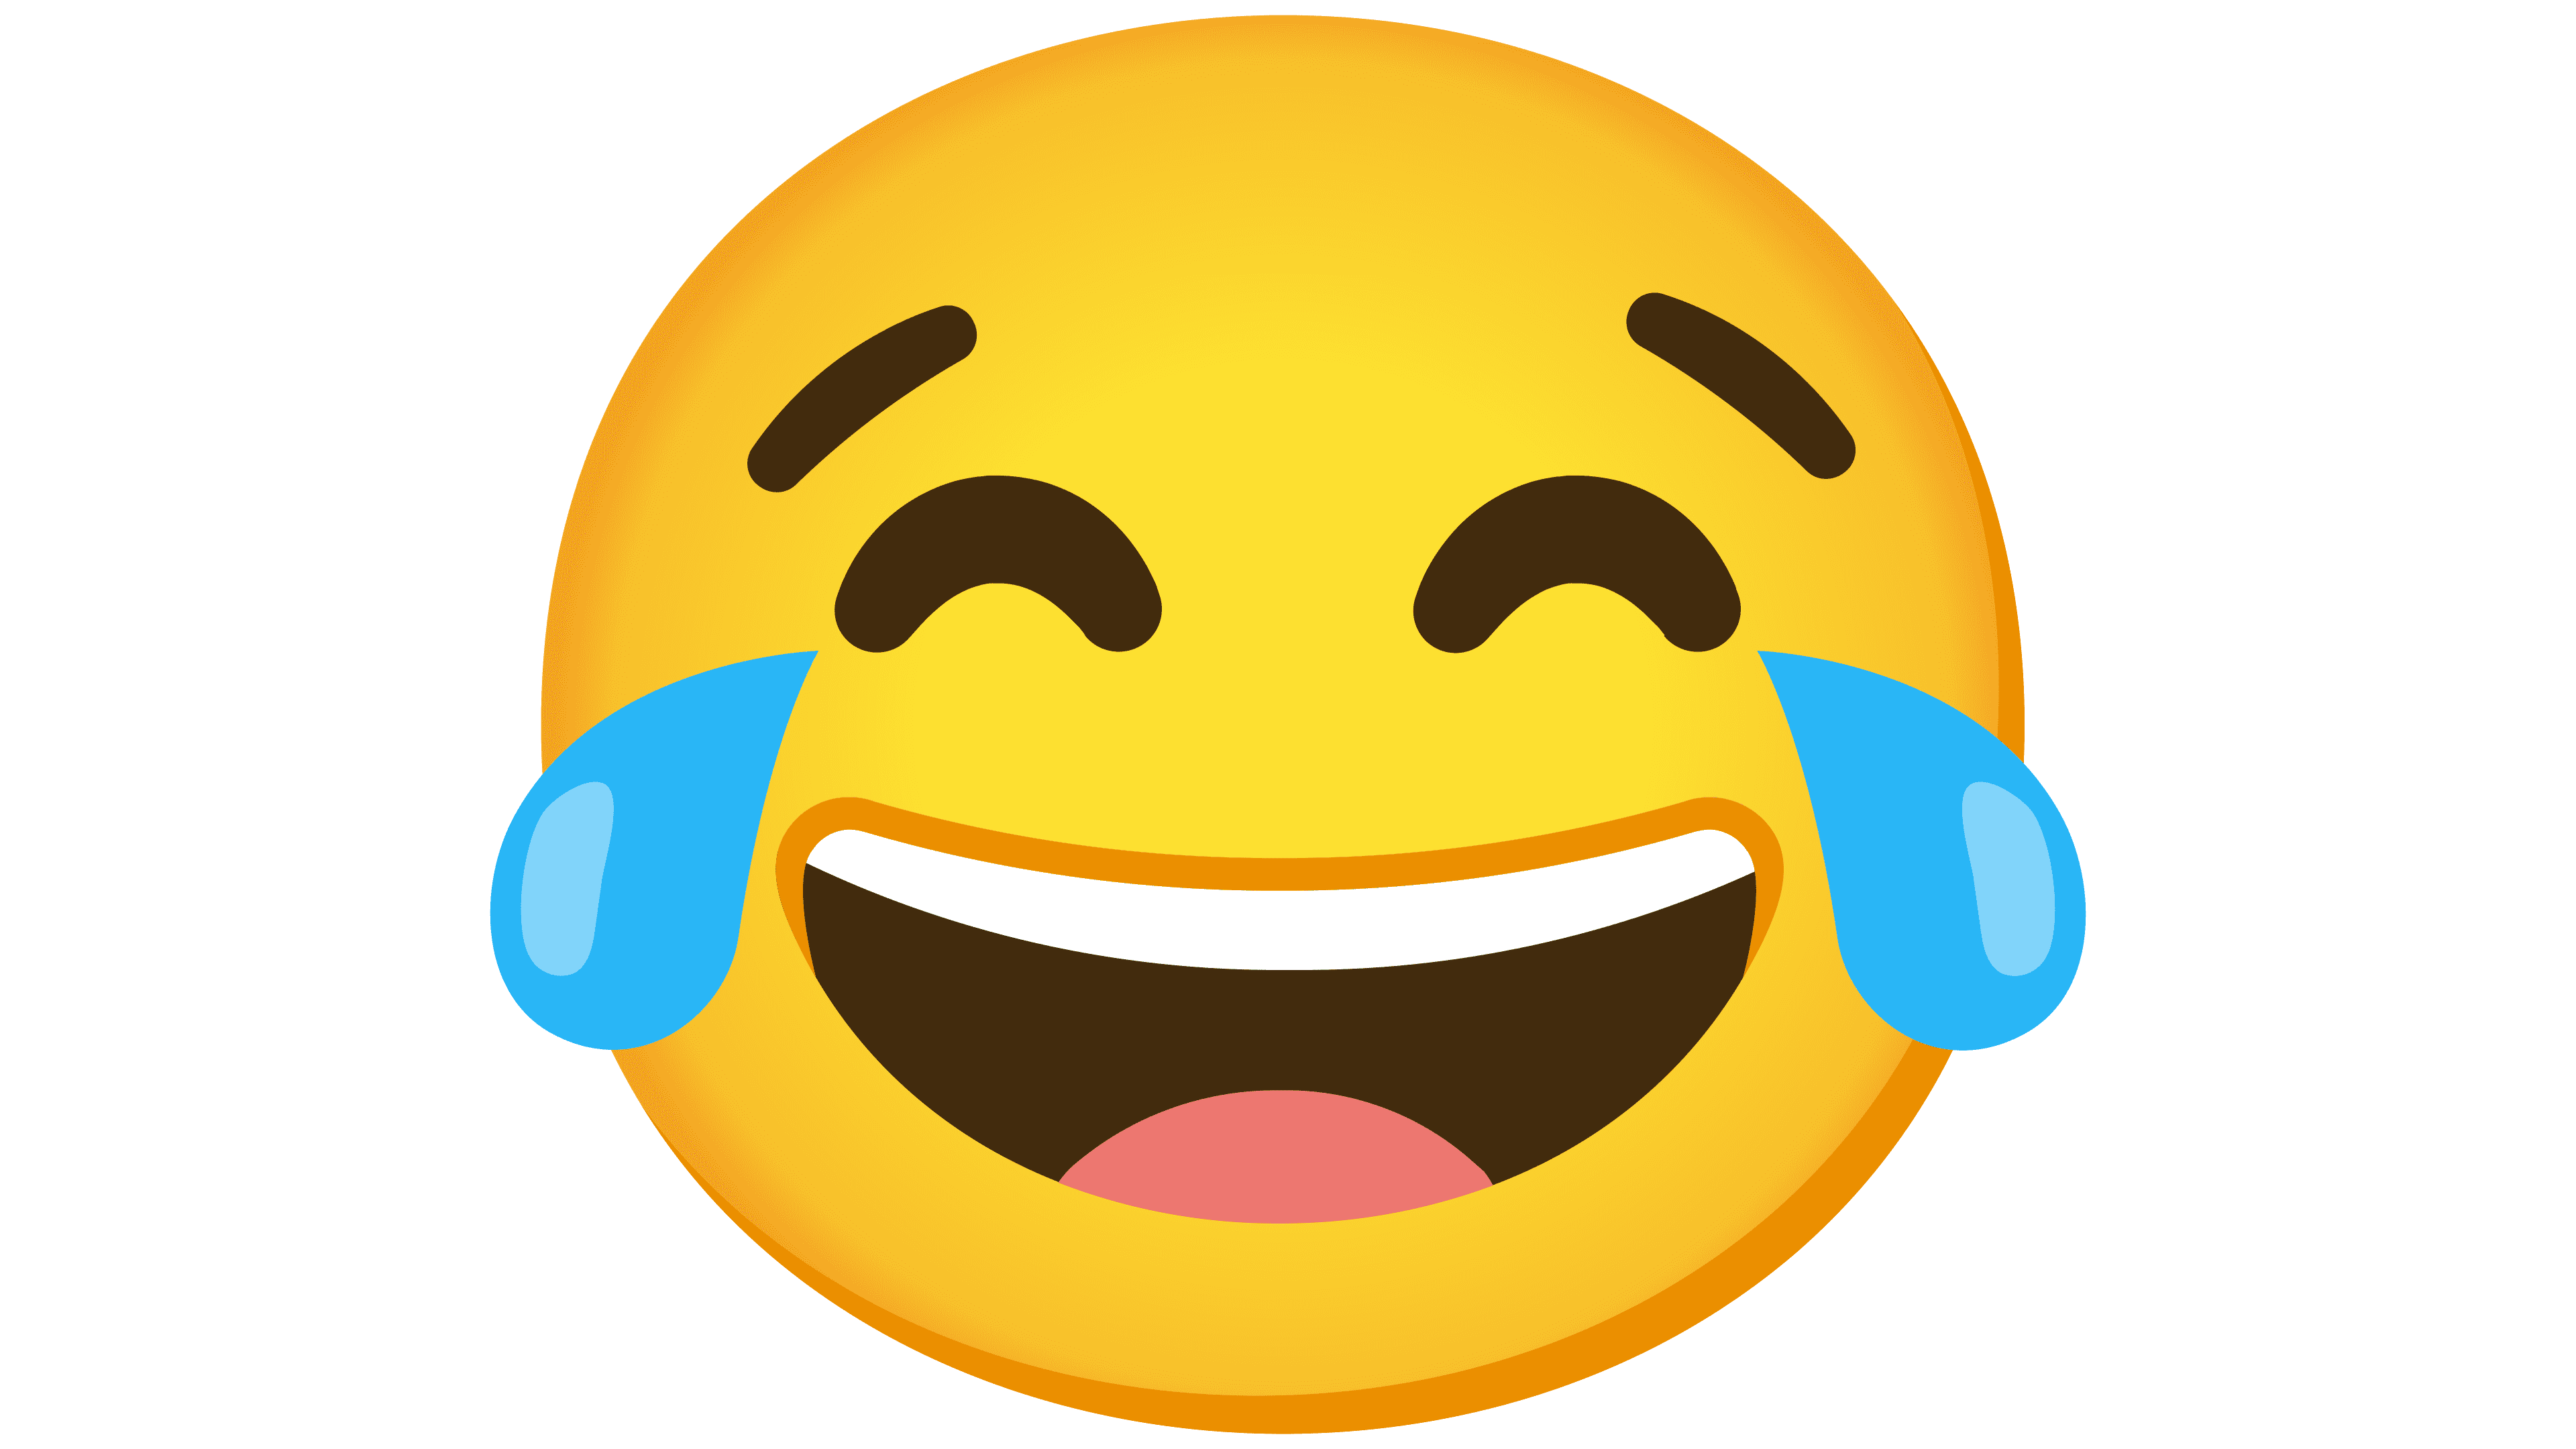 Laughing Emoji - what it means and how to use it